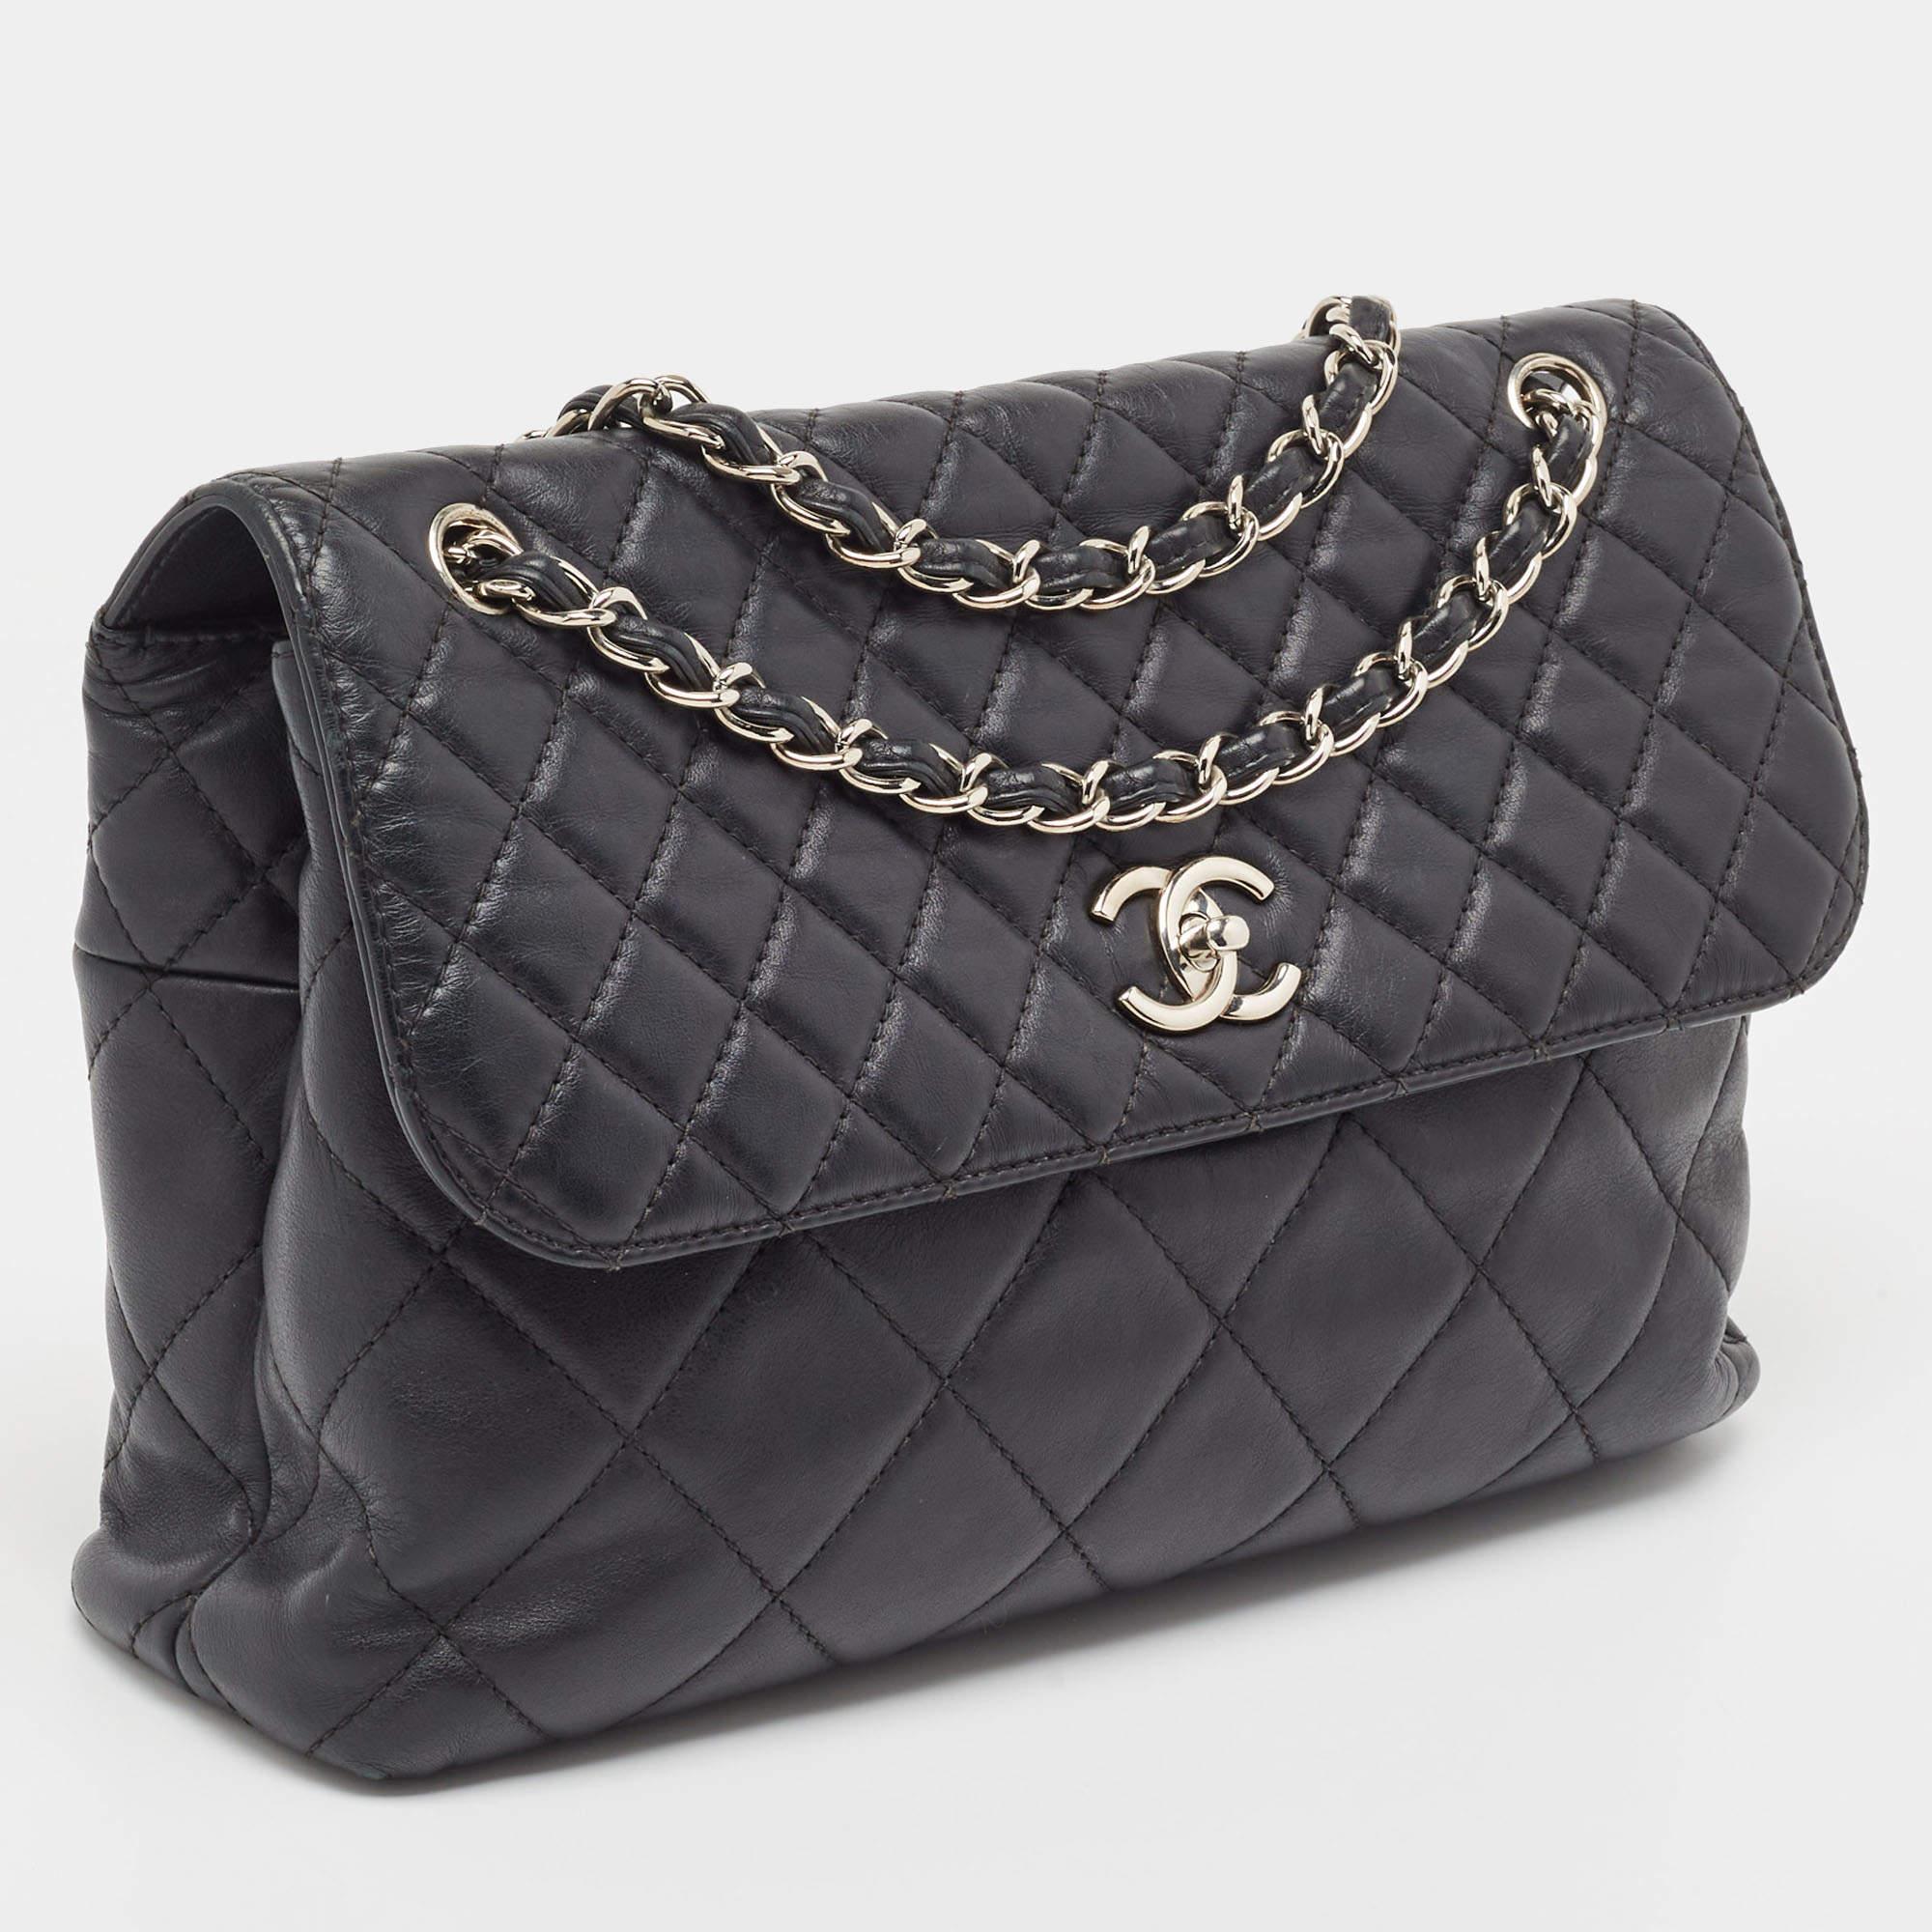 Women's Chanel Black Quilted Leather In The Business Flap Bag